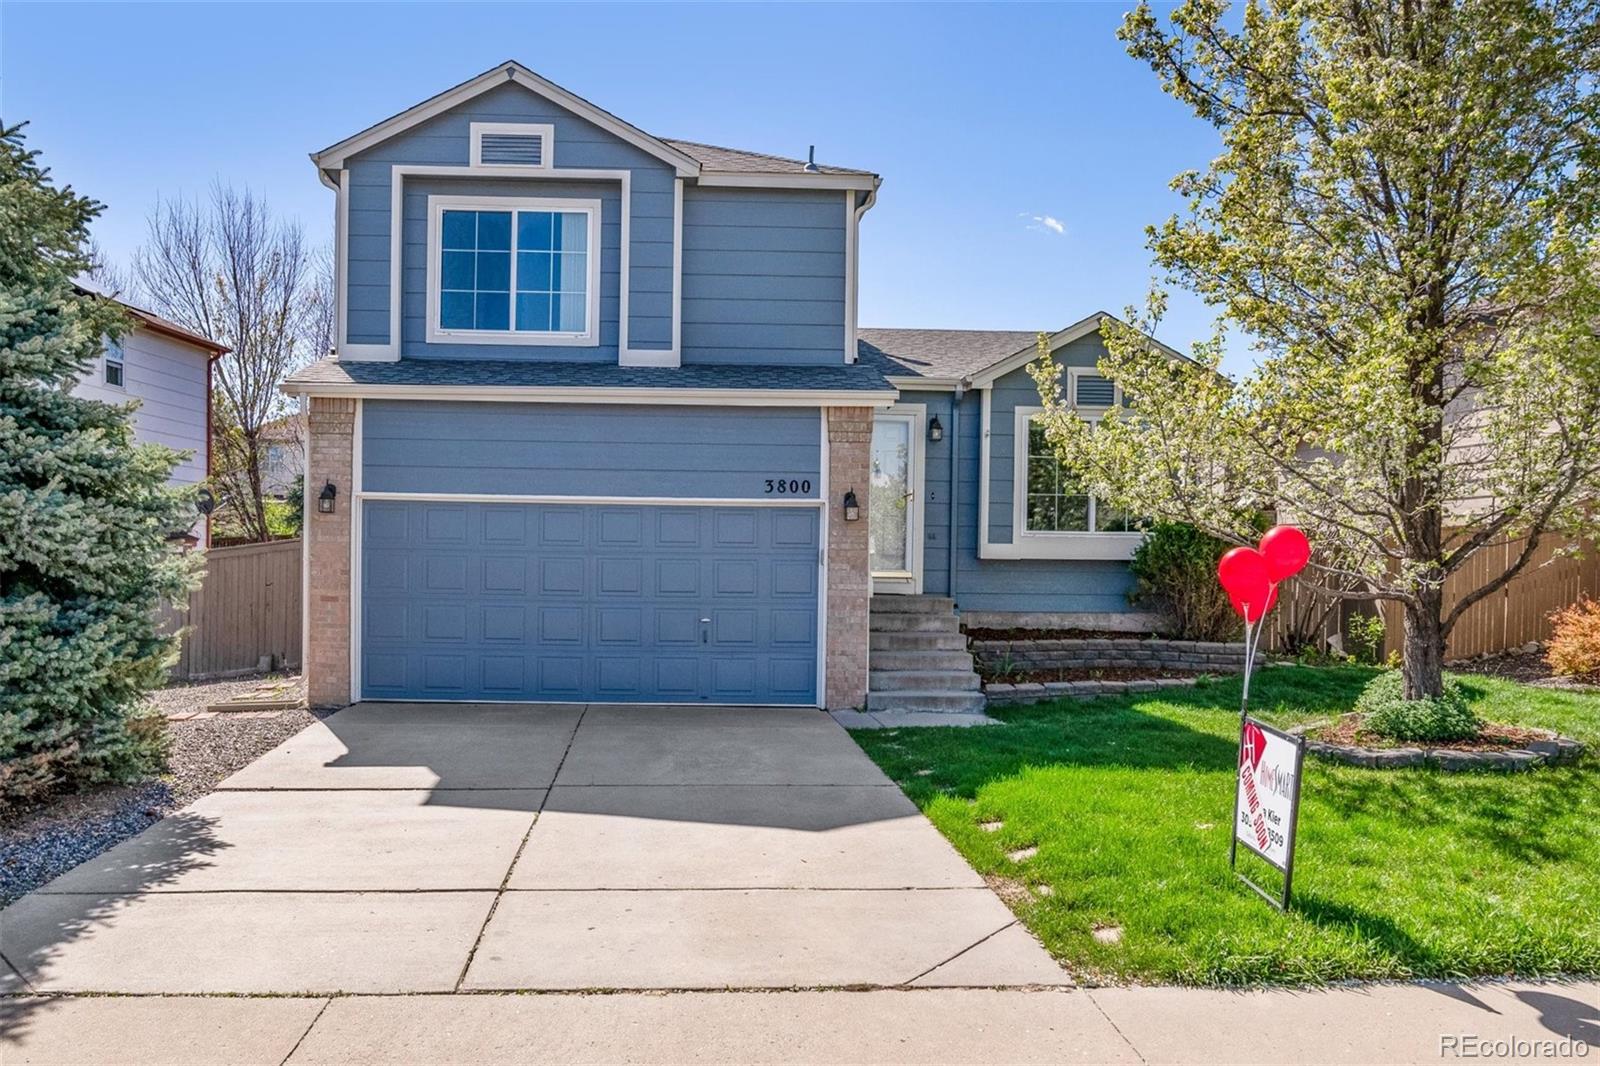 3800  Morning Glory Drive, castle rock MLS: 9018127 Beds: 4 Baths: 3 Price: $585,000